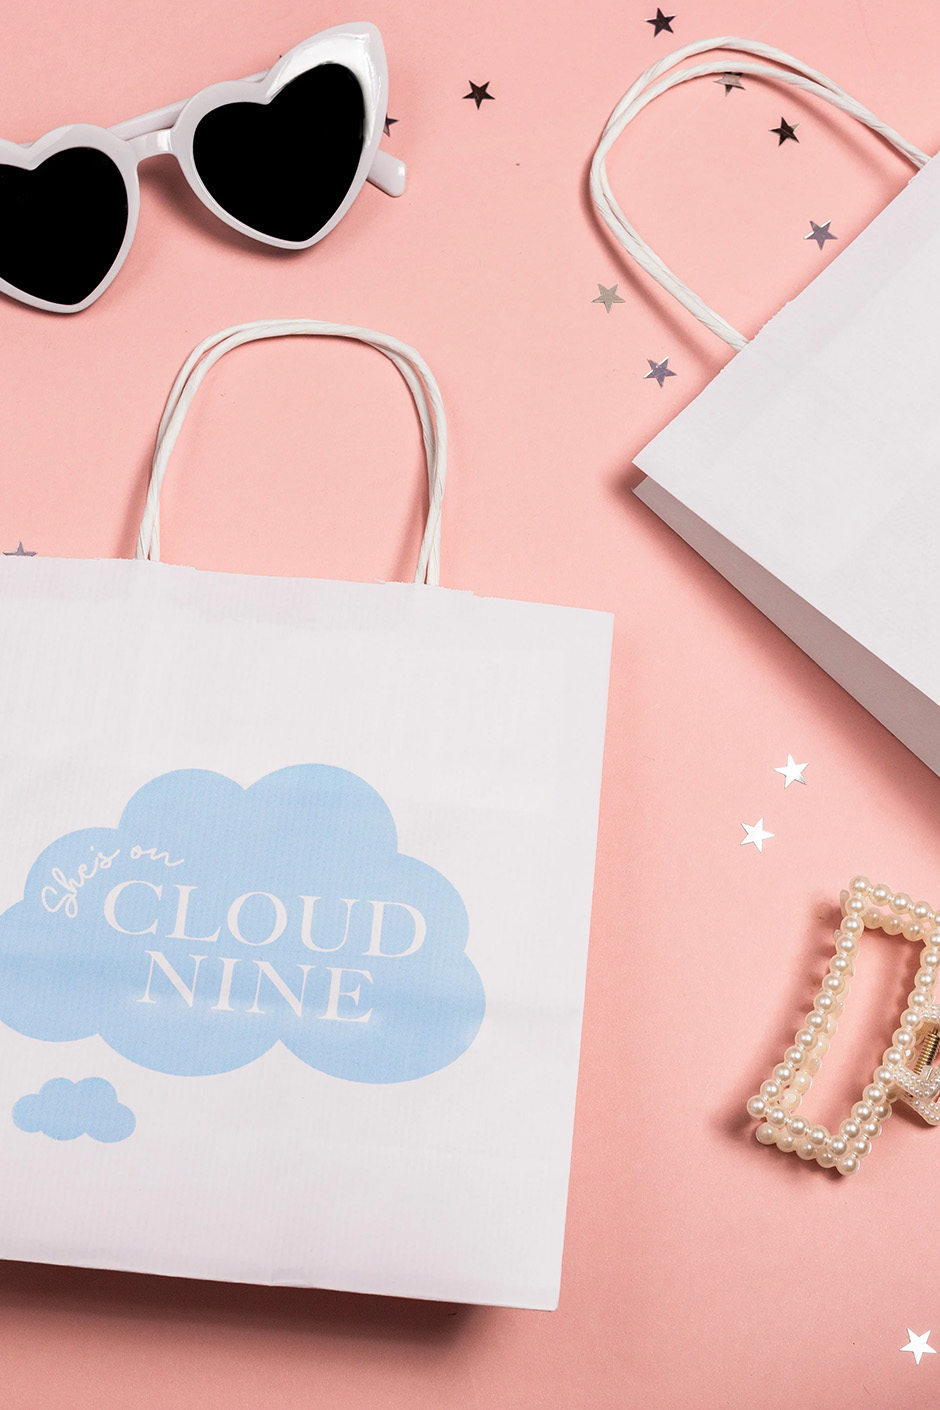 On Cloud Nine theme white gift bags with blue writing for hen party guests 